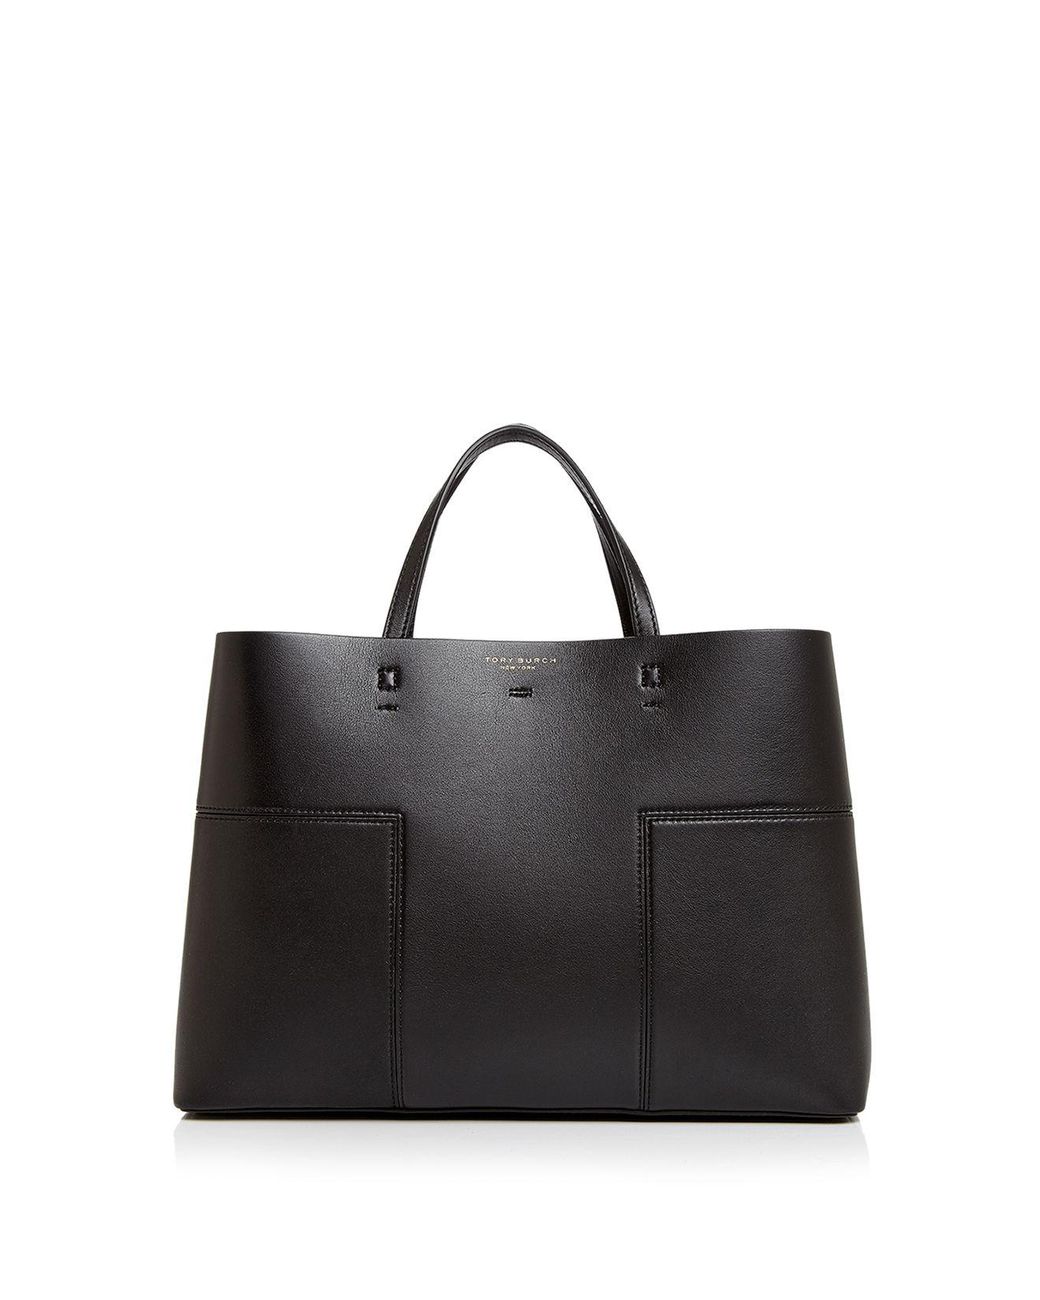 Tory Burch Block-t Triple Compartment Leather Tote in Black | Lyst